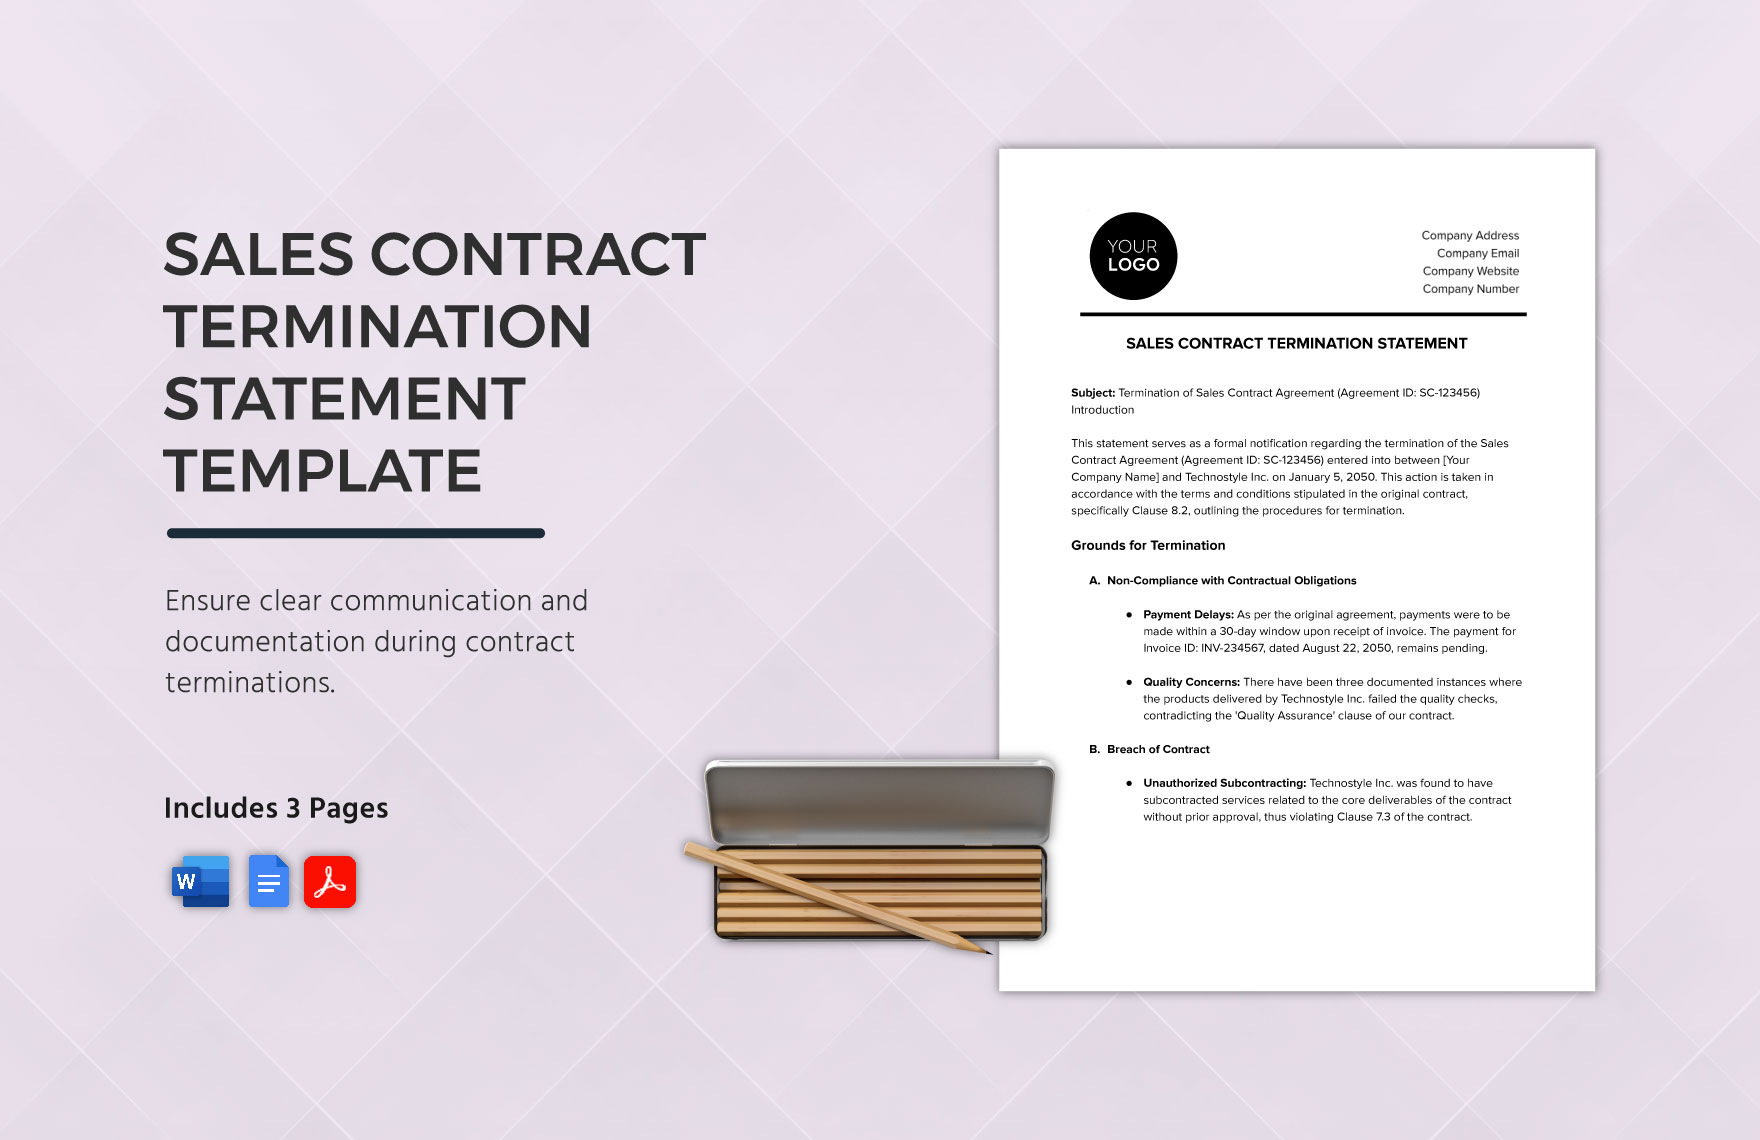 Sales Contract Termination Statement Template